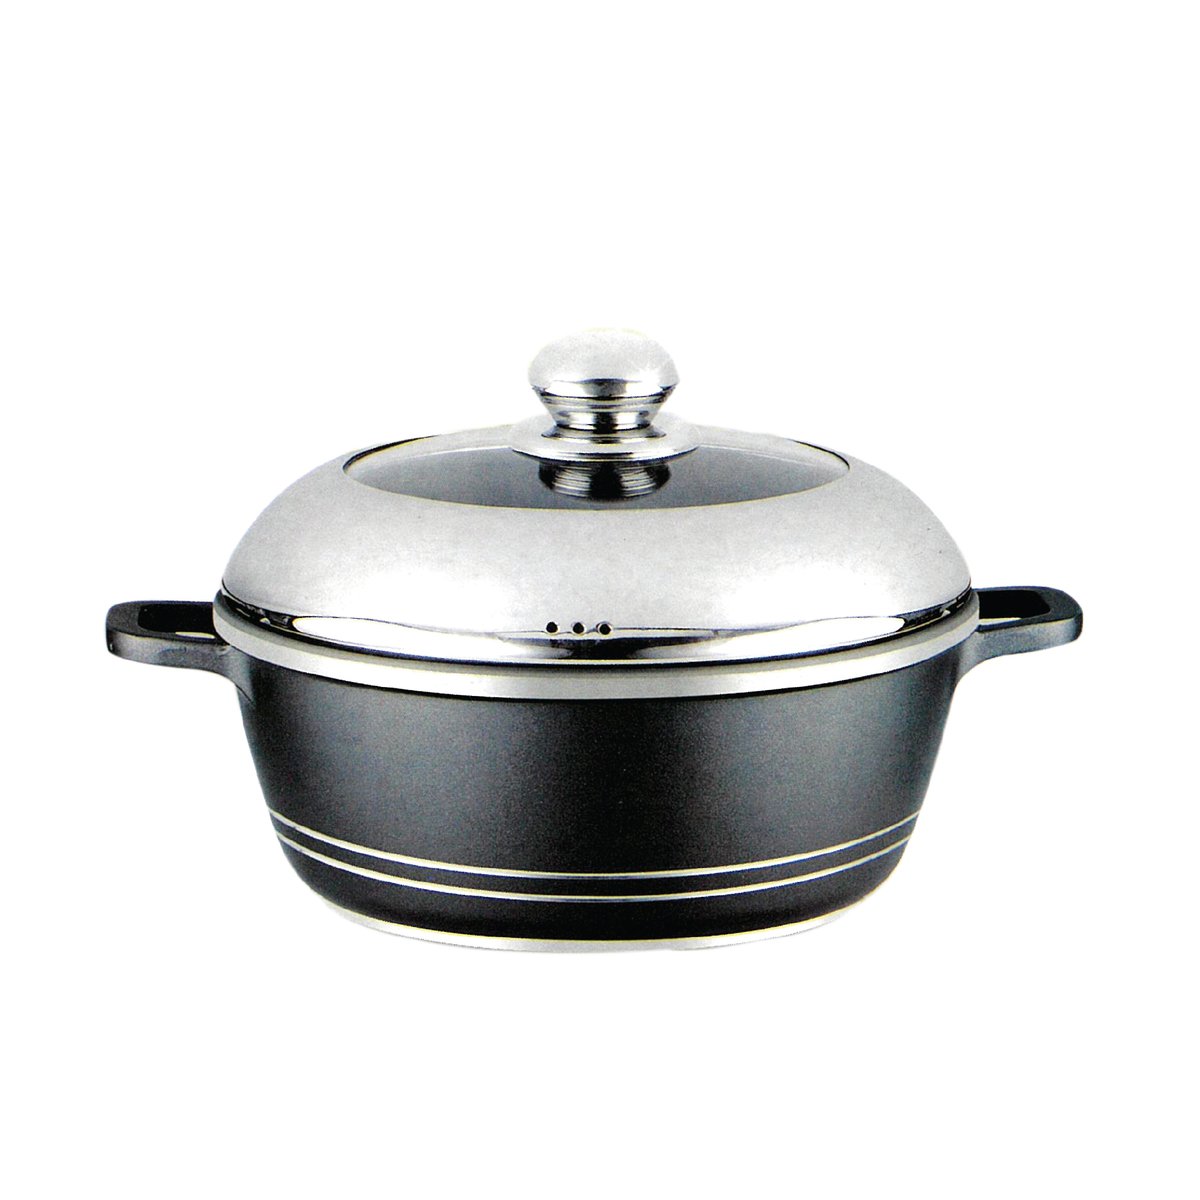 Chefline Diecast Dutch Oven With Stainless Steel Lid Sdb36cm